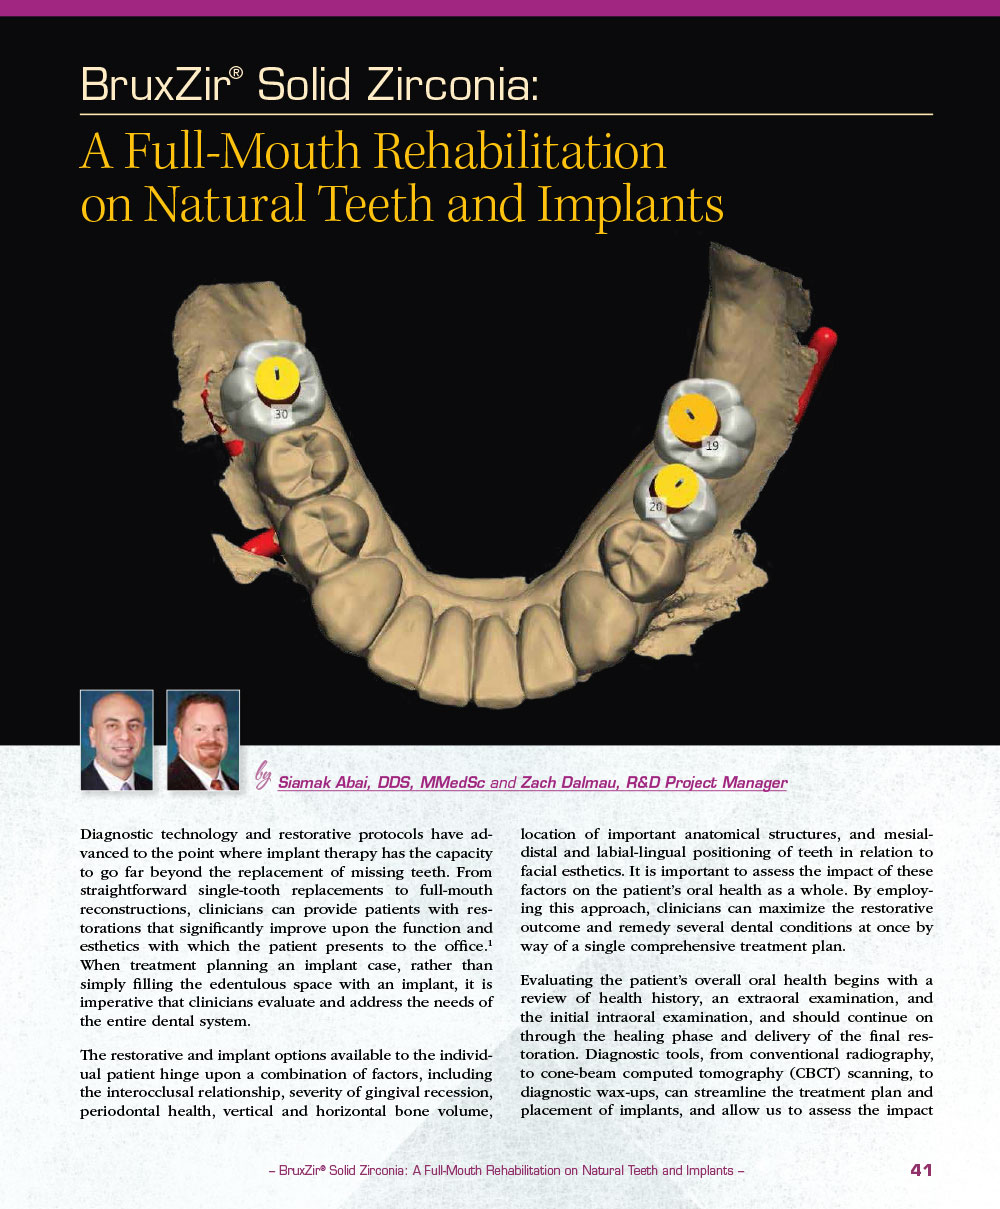 BruxZir® Solid Zirconia: A Full-Mouth Rehabilitation on Natural Teeth and Implants